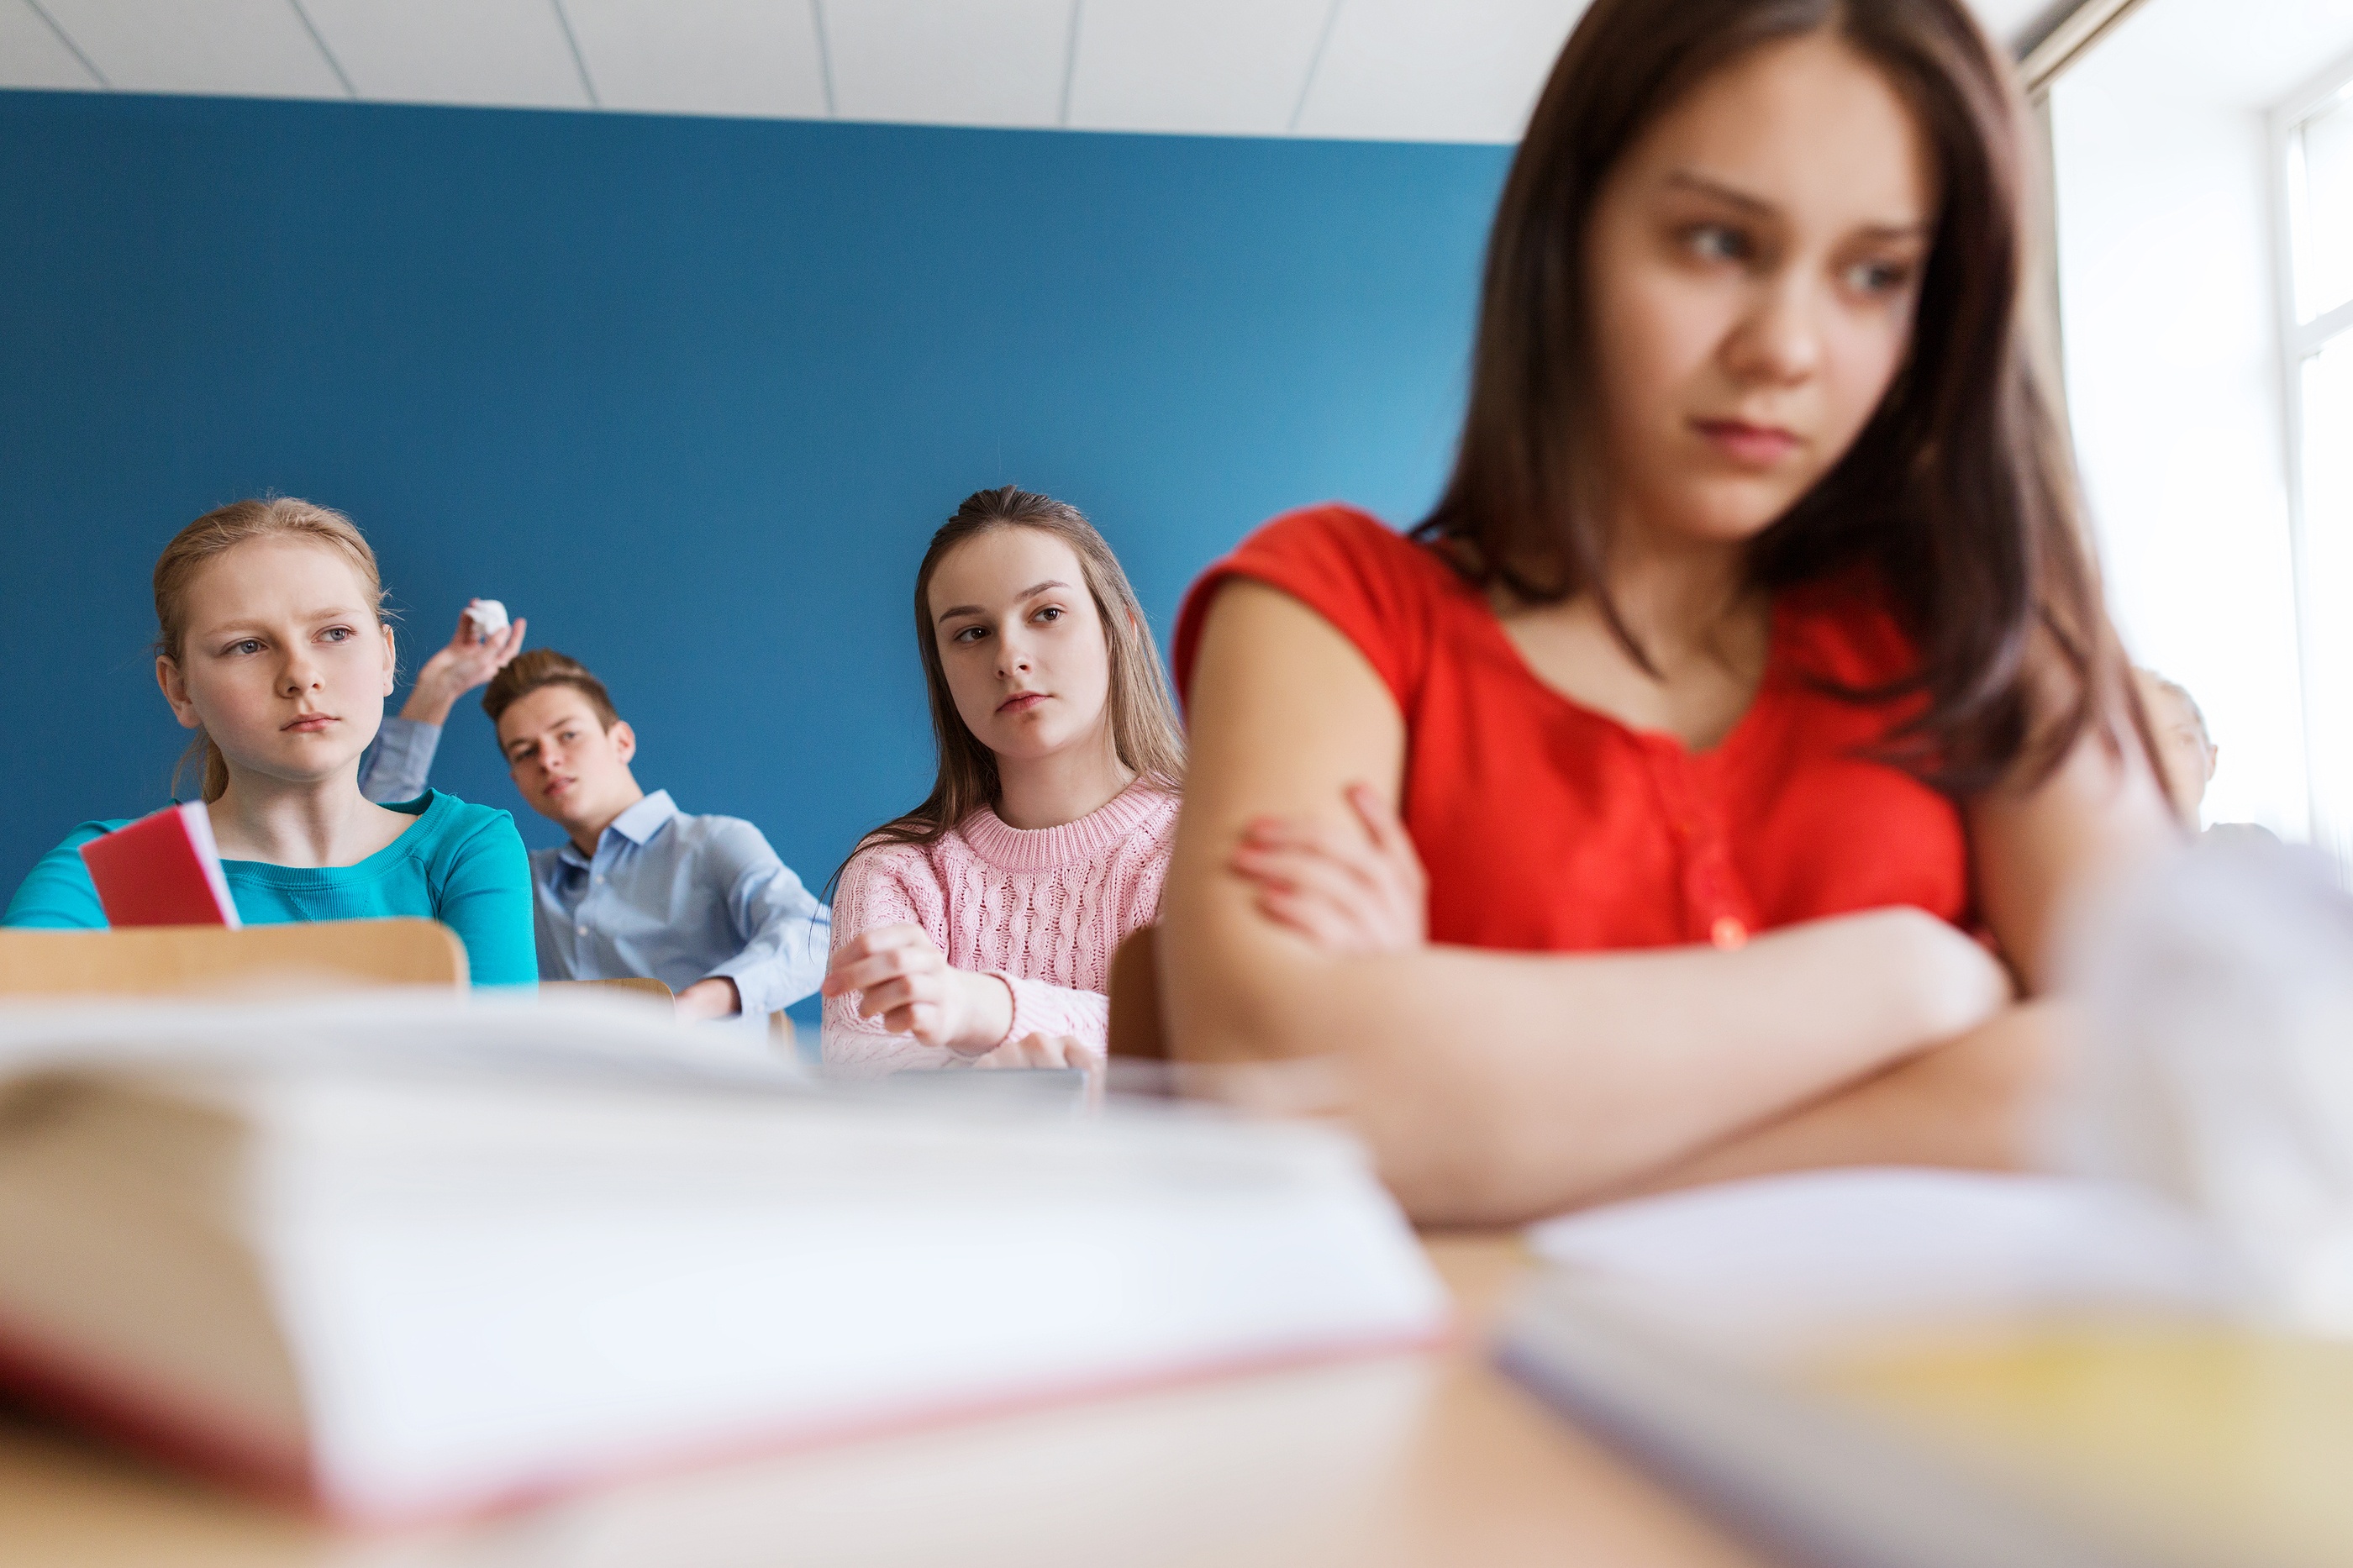 Bullying in the Classroom: When Do You Intervene and How?